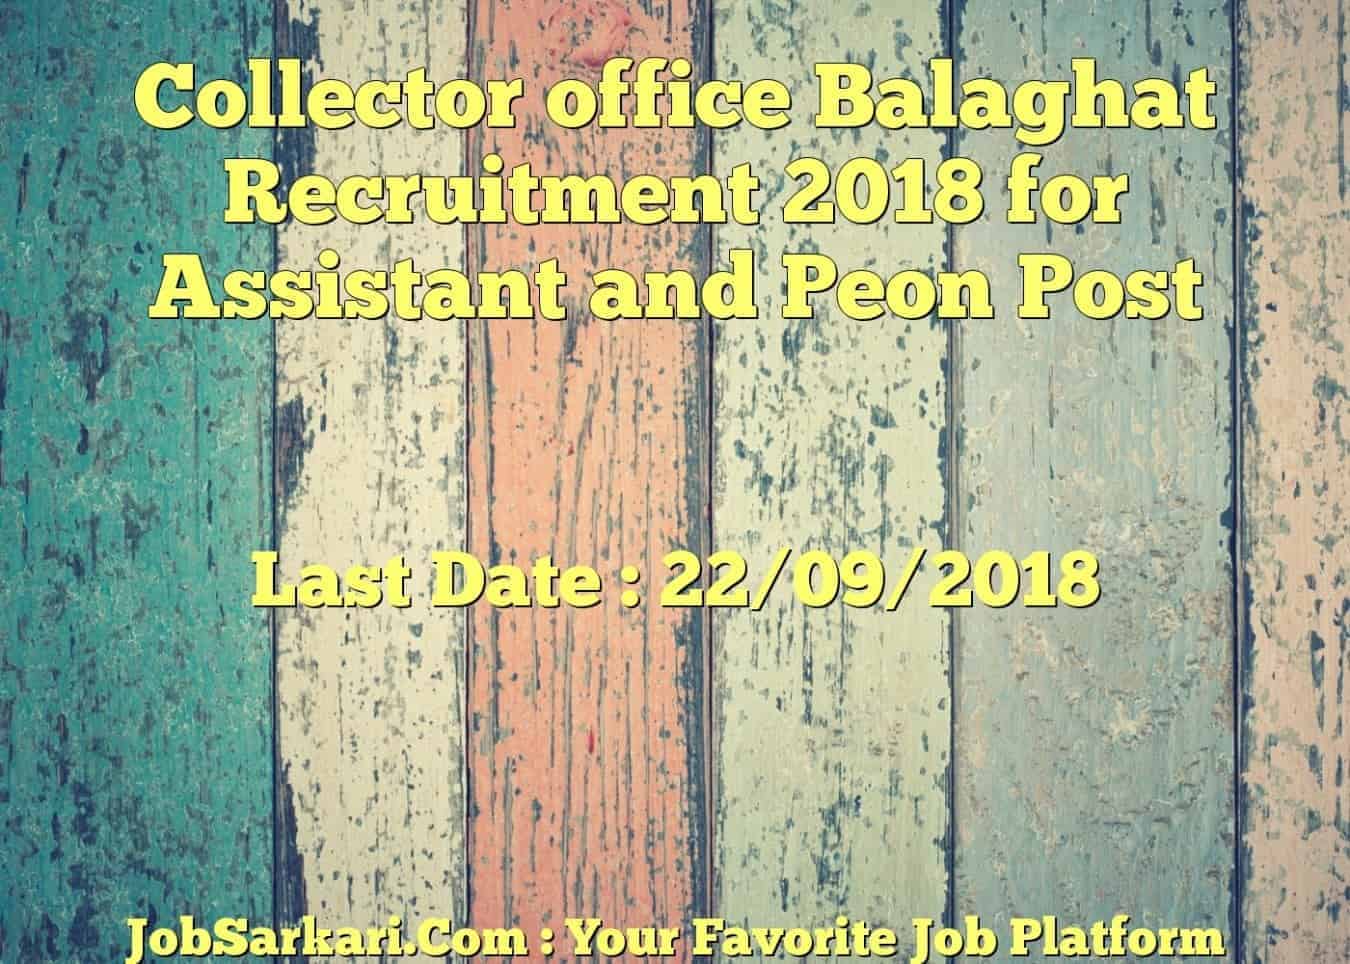 Collector office Balaghat Recruitment 2018 for Assistant and Peon Post